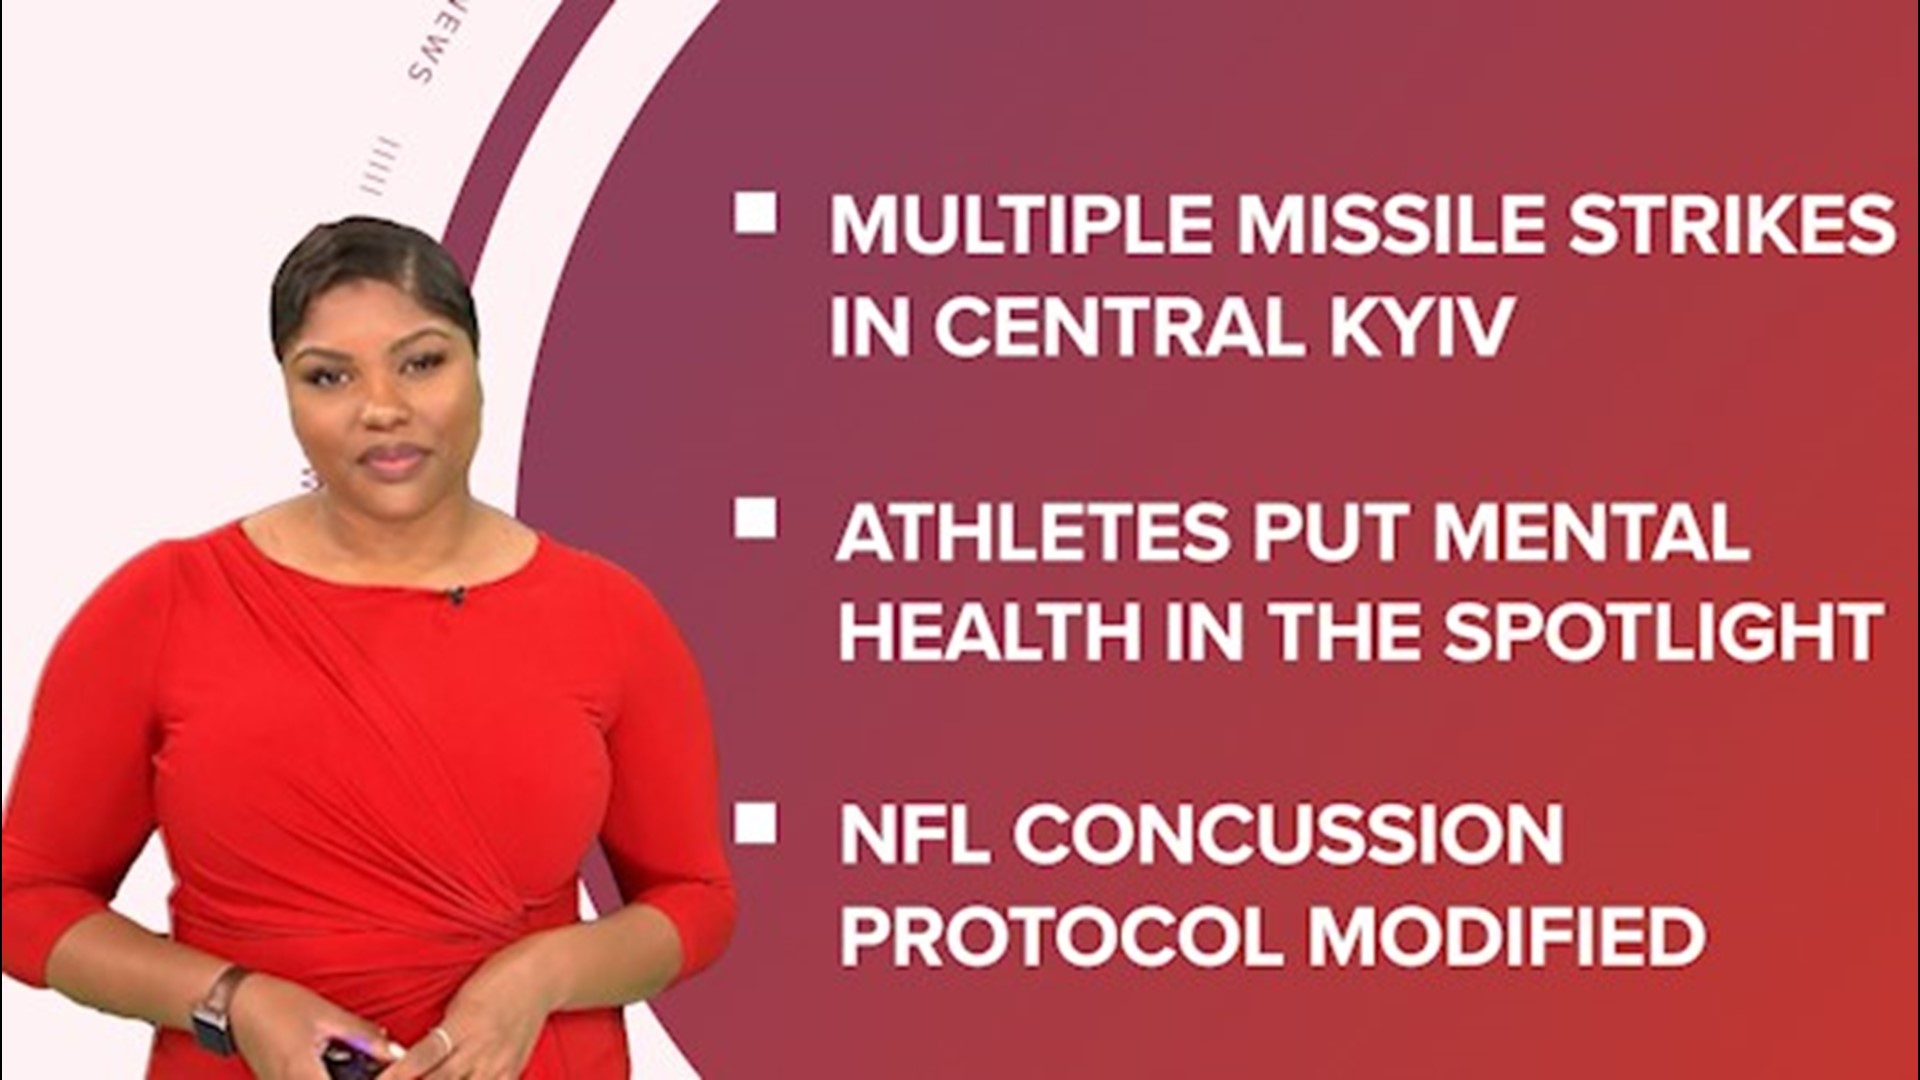 A look at what is happening in the news from Russian missile strikes on Kyiv to World Mental Health day and the NFL changing its concussion protocol.